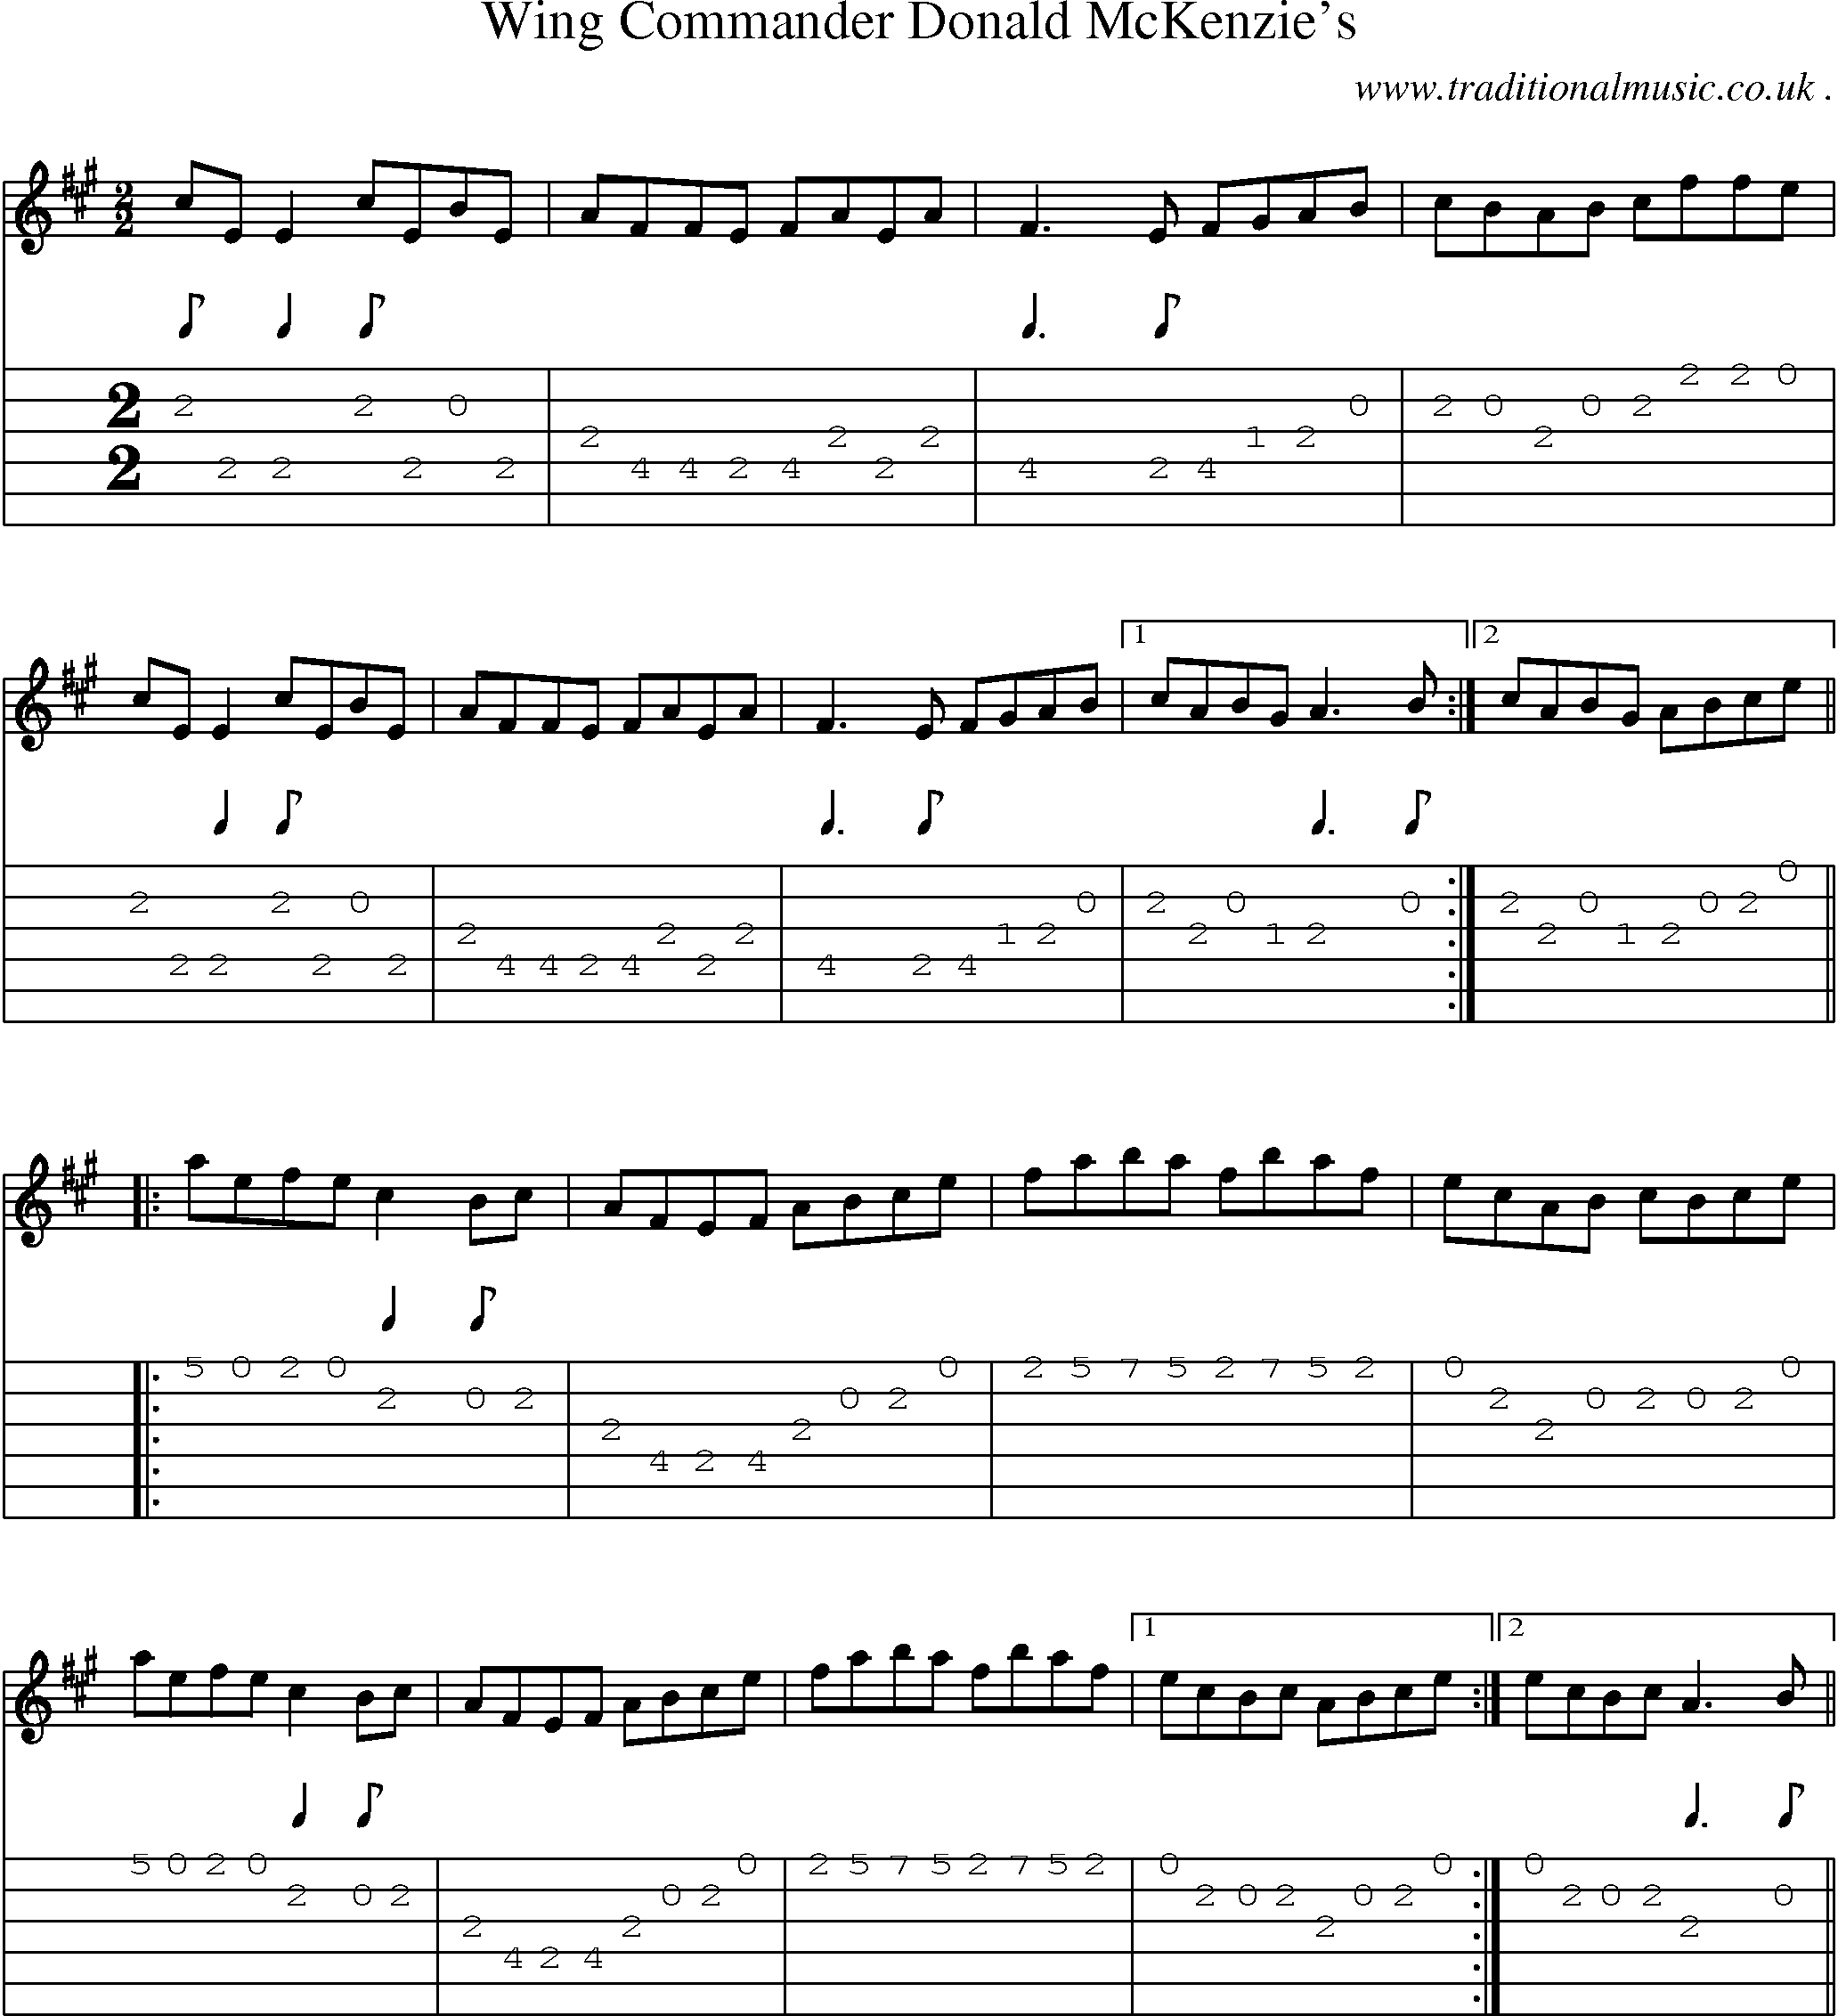 Sheet-Music and Guitar Tabs for Wing Commander Donald Mckenzies